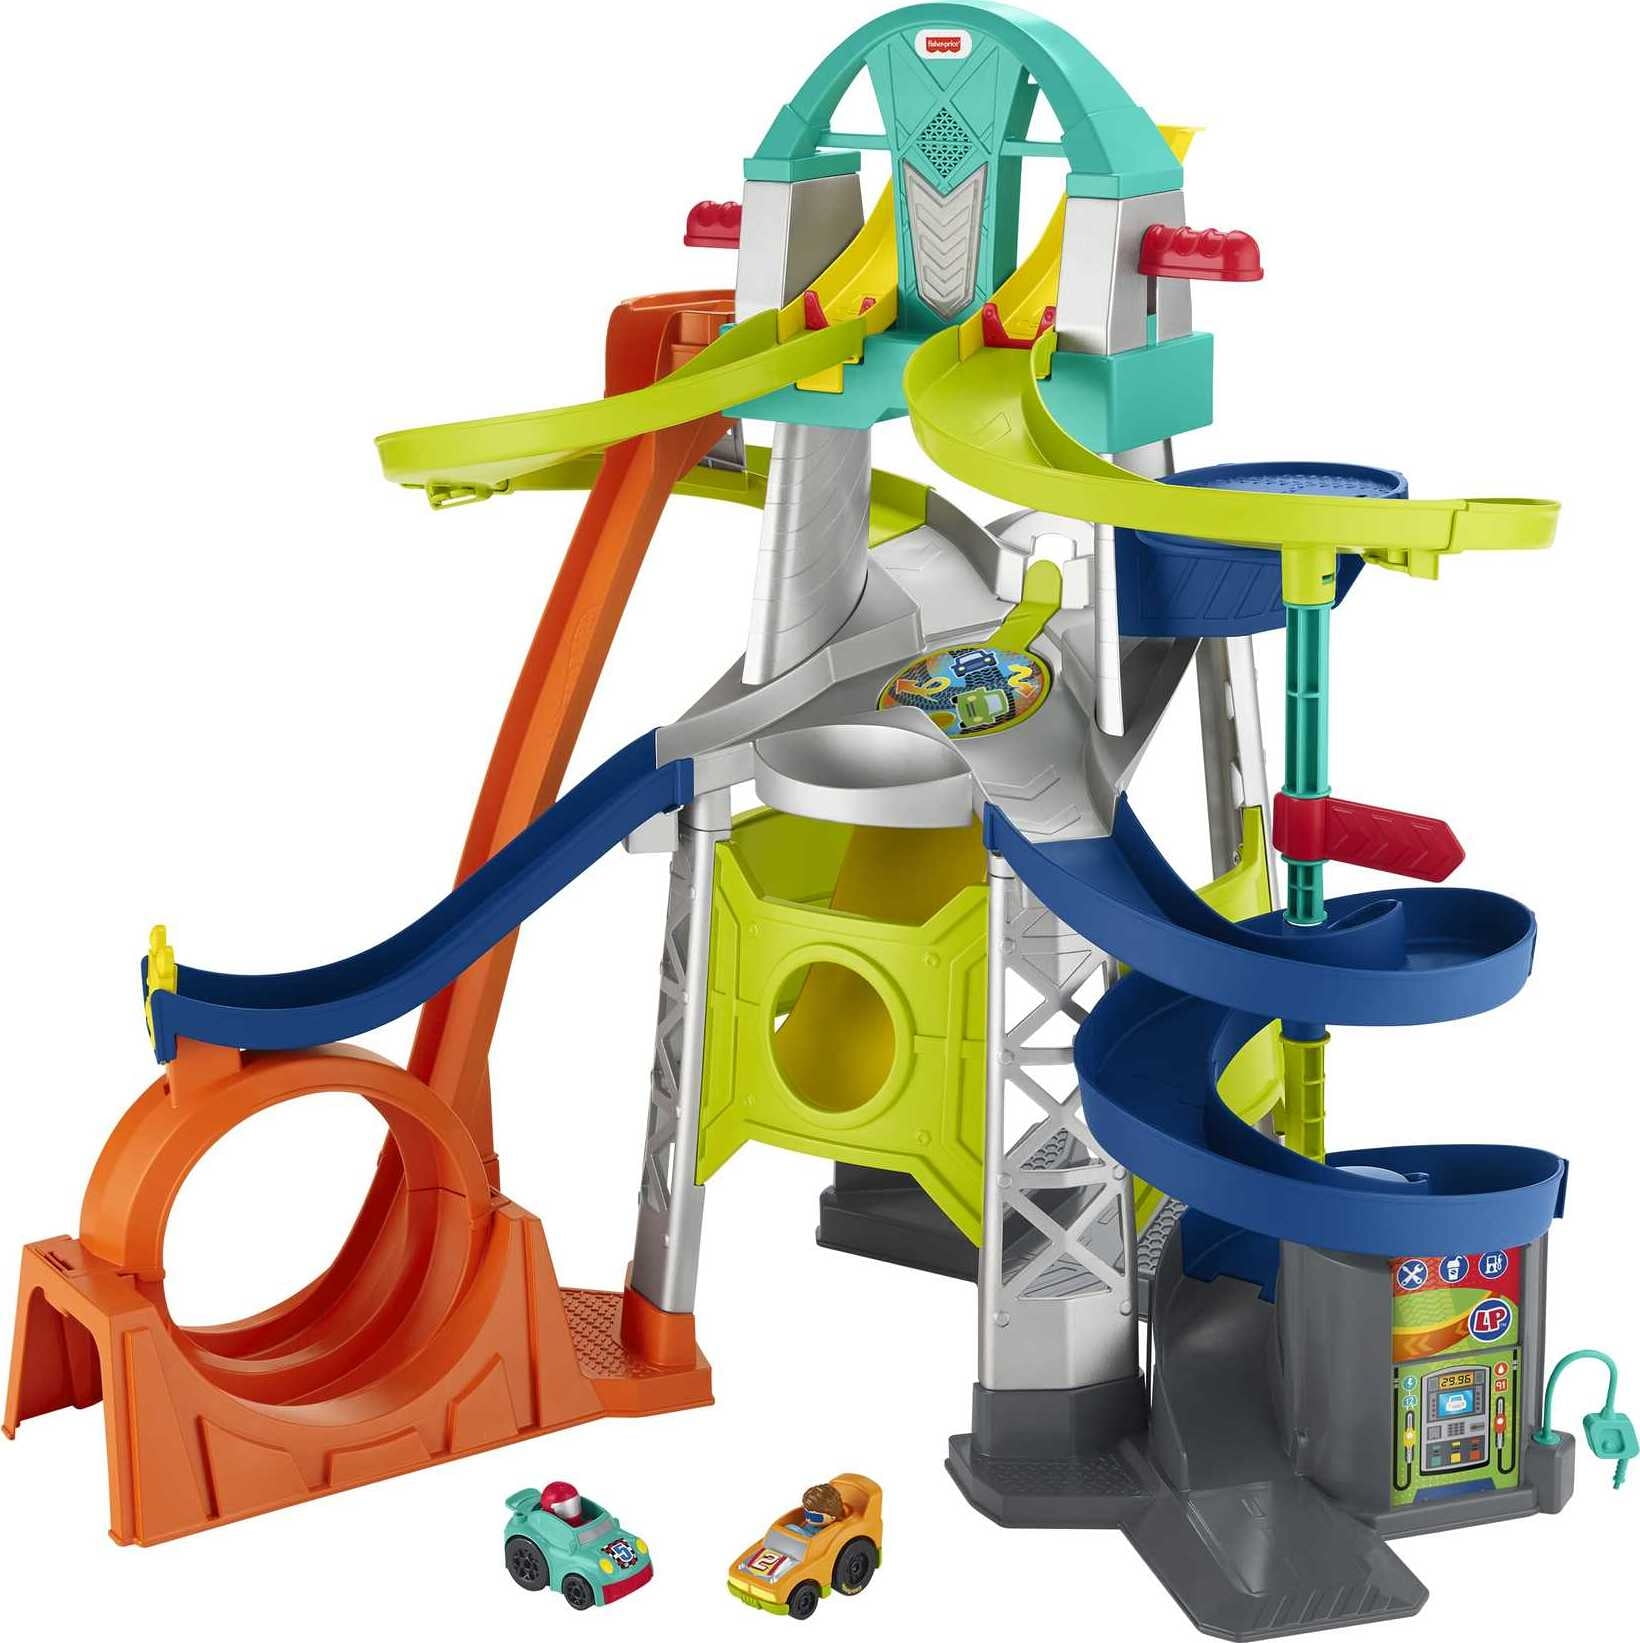 Little People Carnival Playset - Entertainment Earth